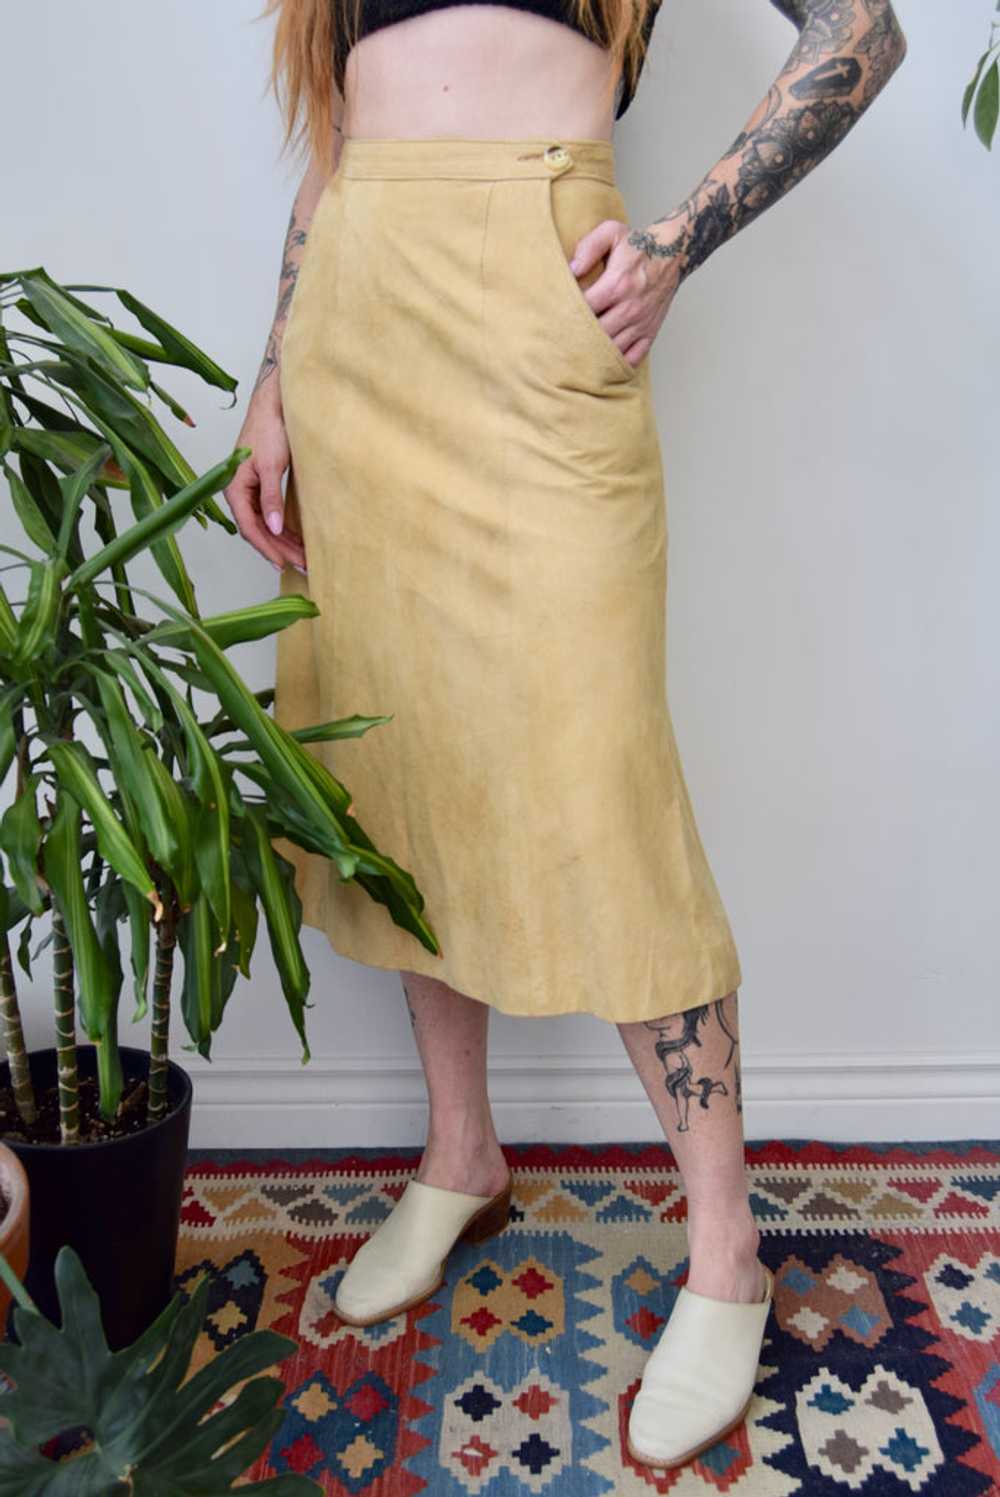 Tawny Suede 70s Skirt - image 3